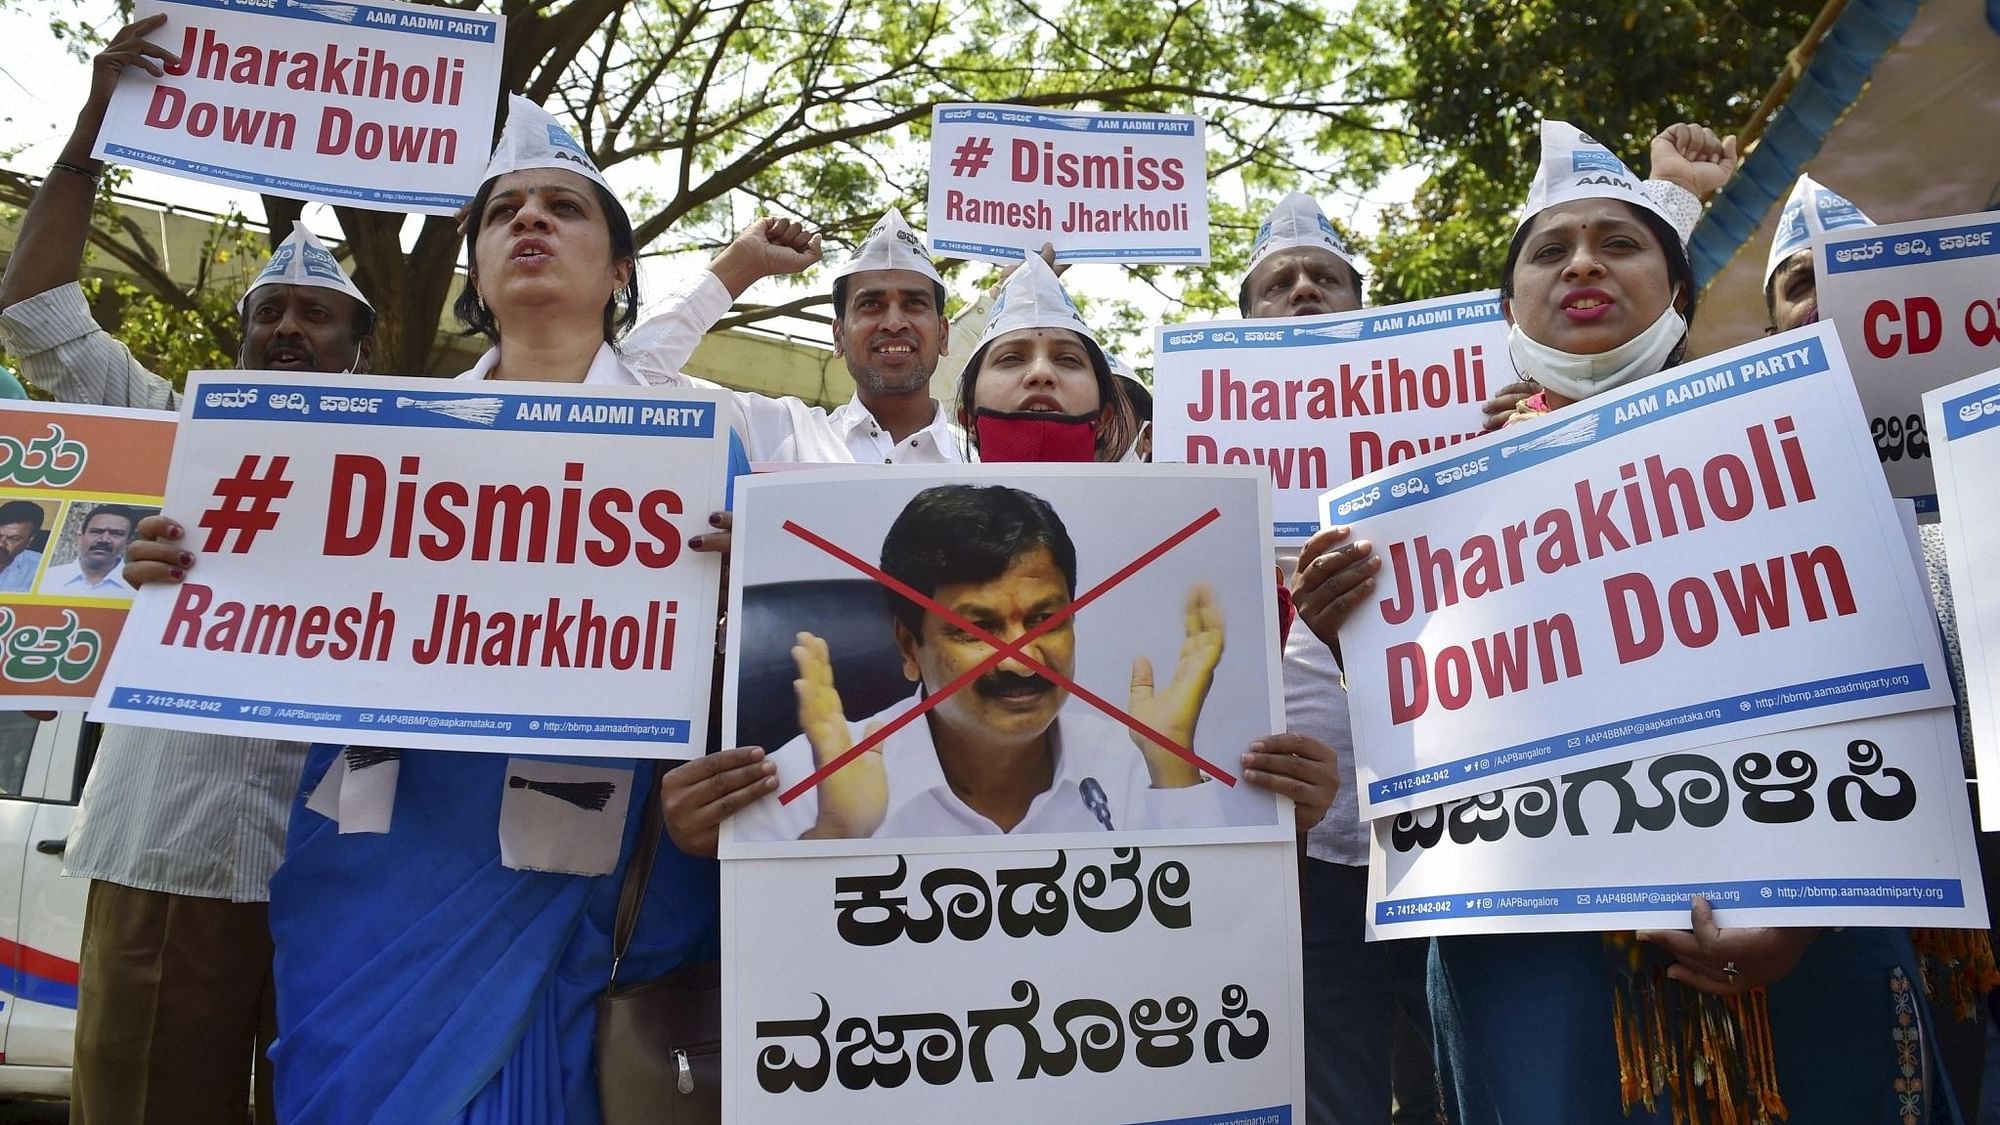 Members of the Aam Aadmi Party raise slogans against Karnataka Minister Ramesh Jarkiholi for his alleged involvement in CD row in Bengaluru, Wednesday, 3 March, 2021.&nbsp;